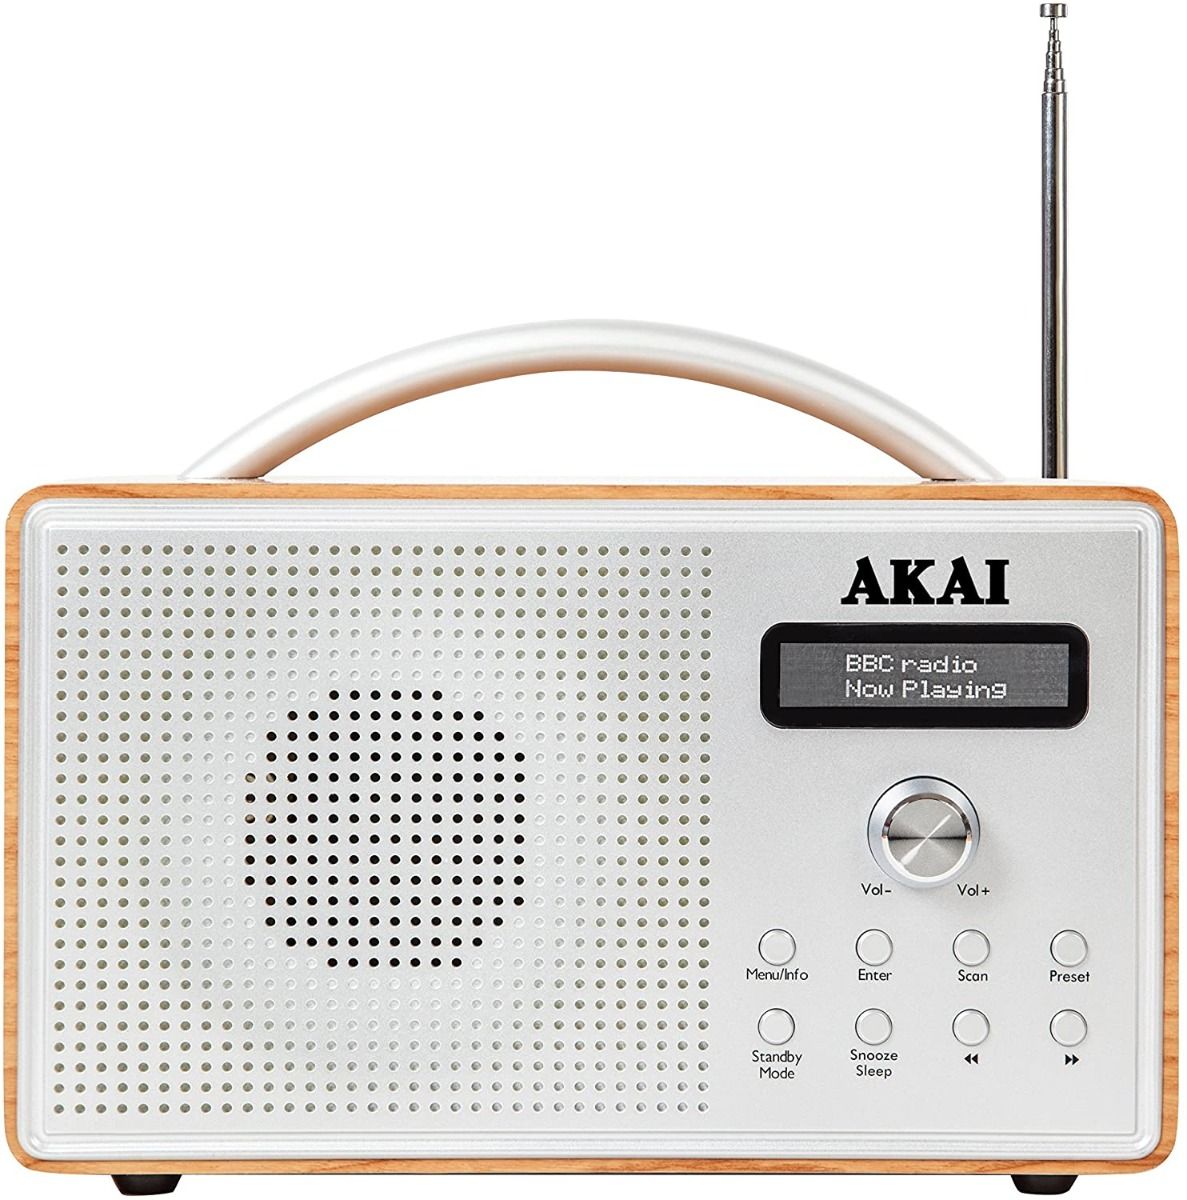 Akai A61018 Portable DAB Radio With LCD Screen, Crystal Clear Speaker - Brown Wood